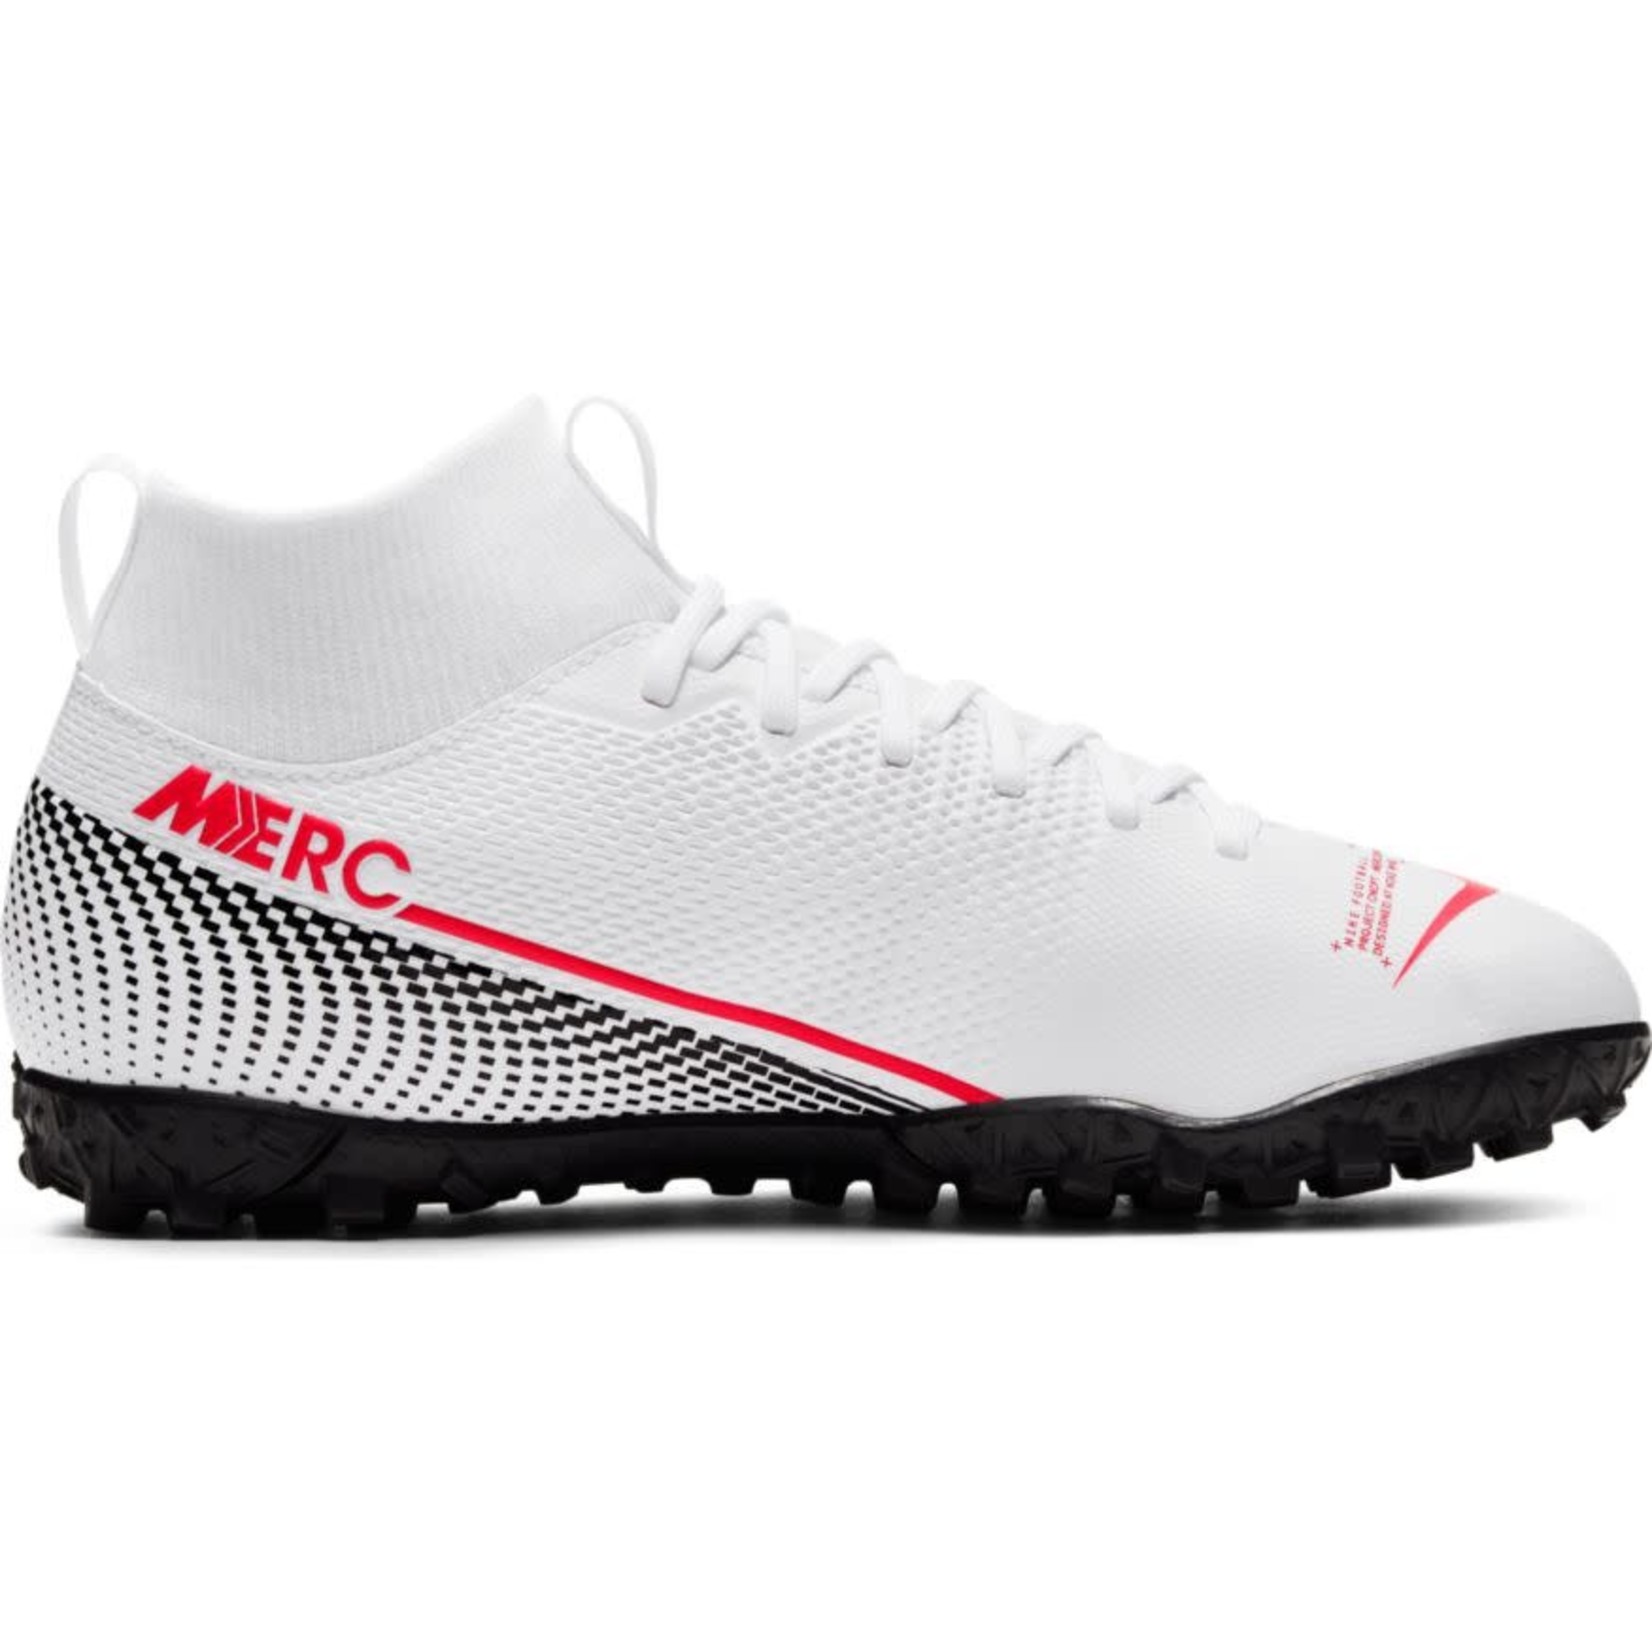 NIKE MERCURIAL SUPERFLY 7 ACADEMY TURF JR (WHITE/RED)